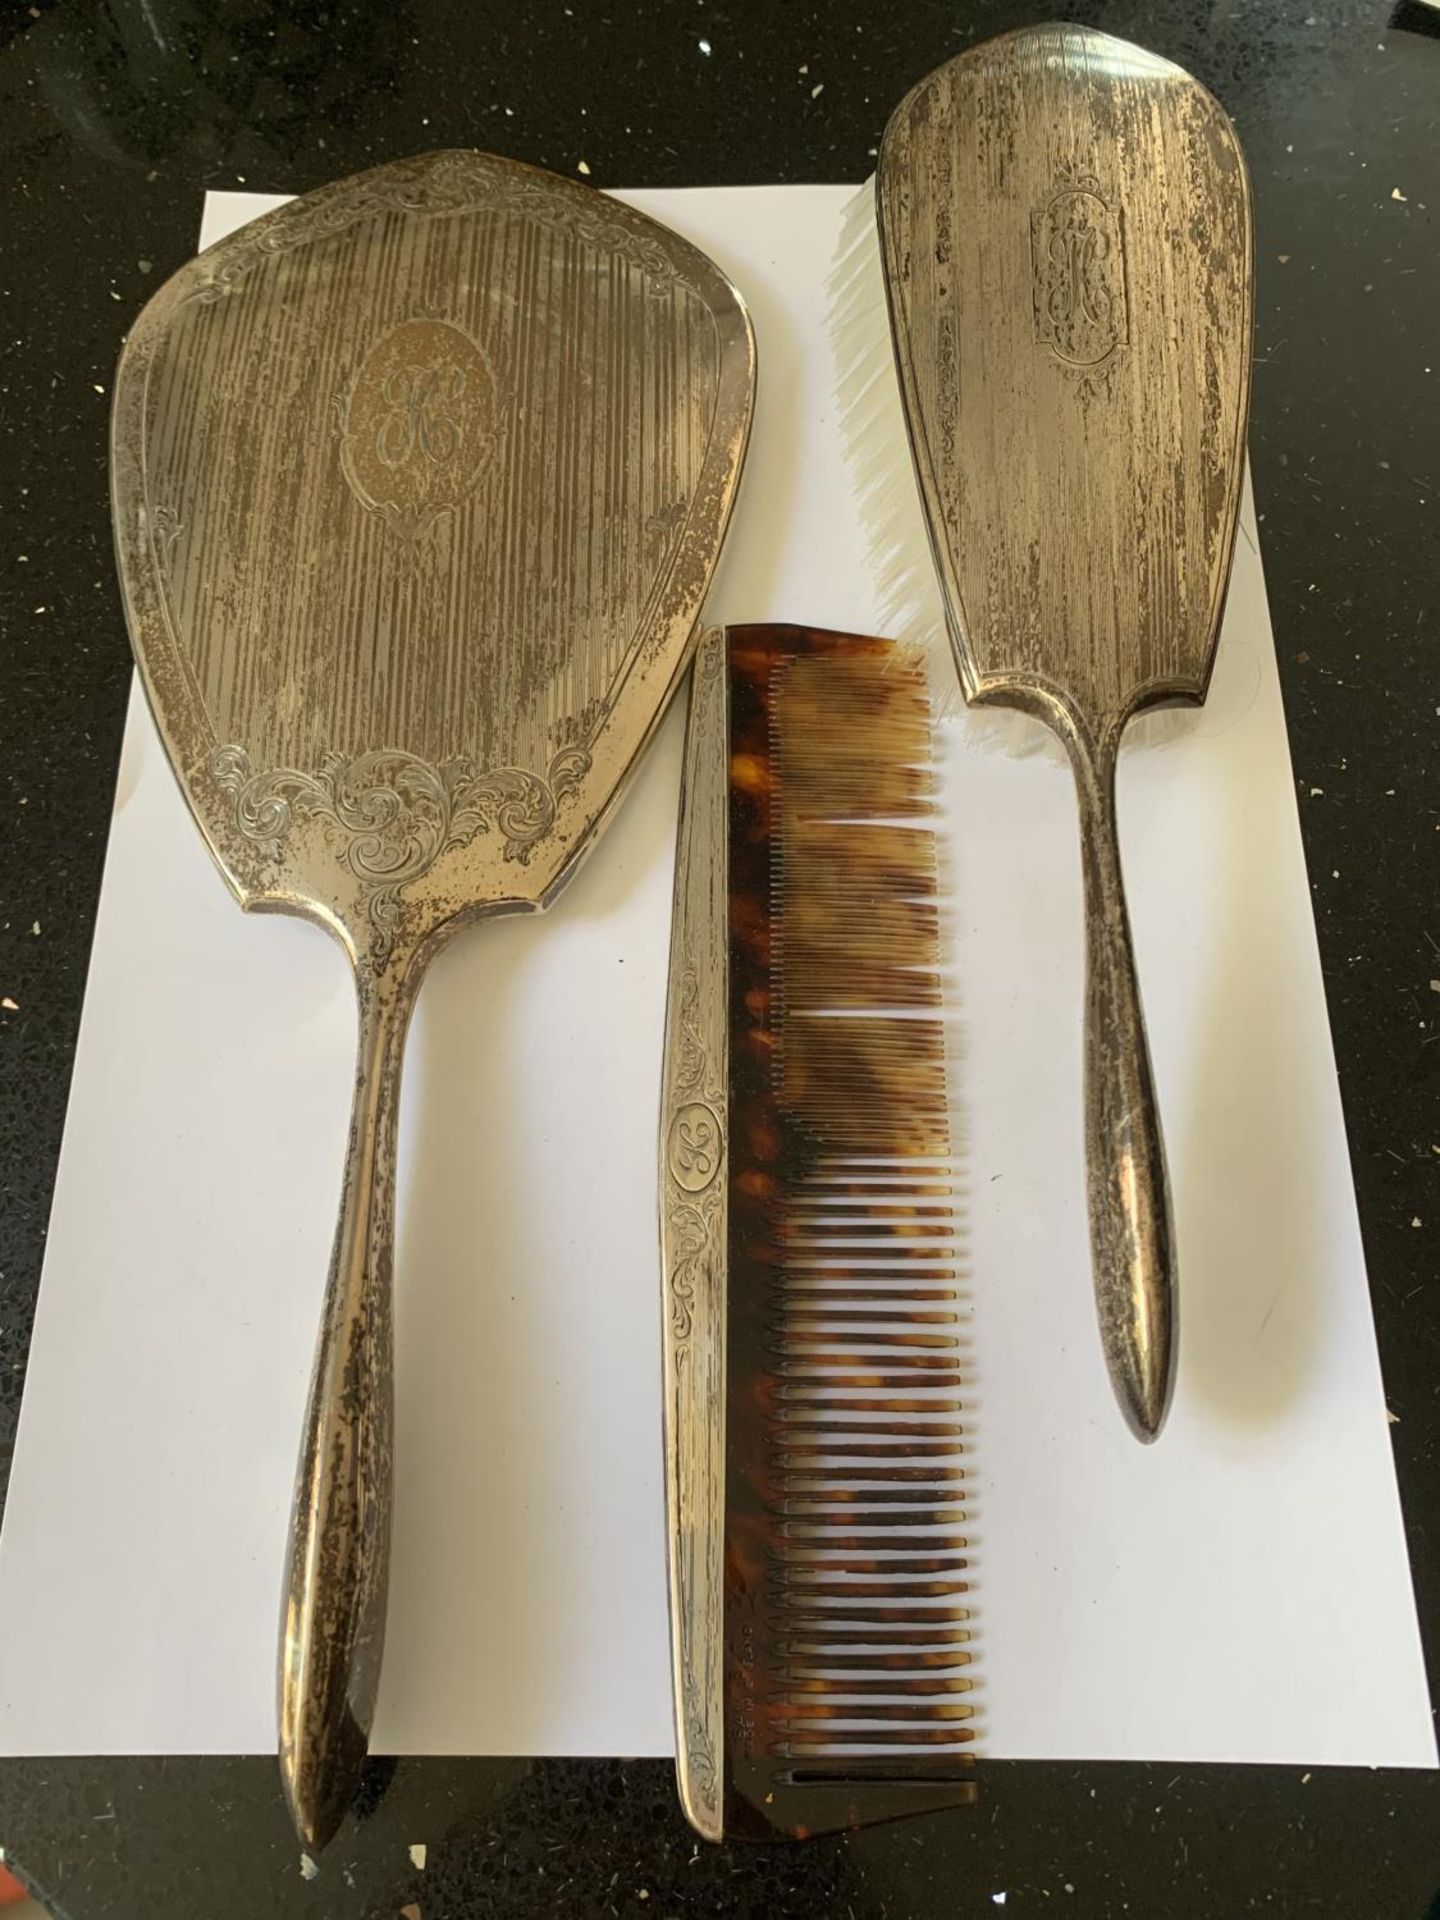 A BIRKS STERLING SILVER VANITY SET COMPRISING OF MIRROR, BRUSH AND COMB